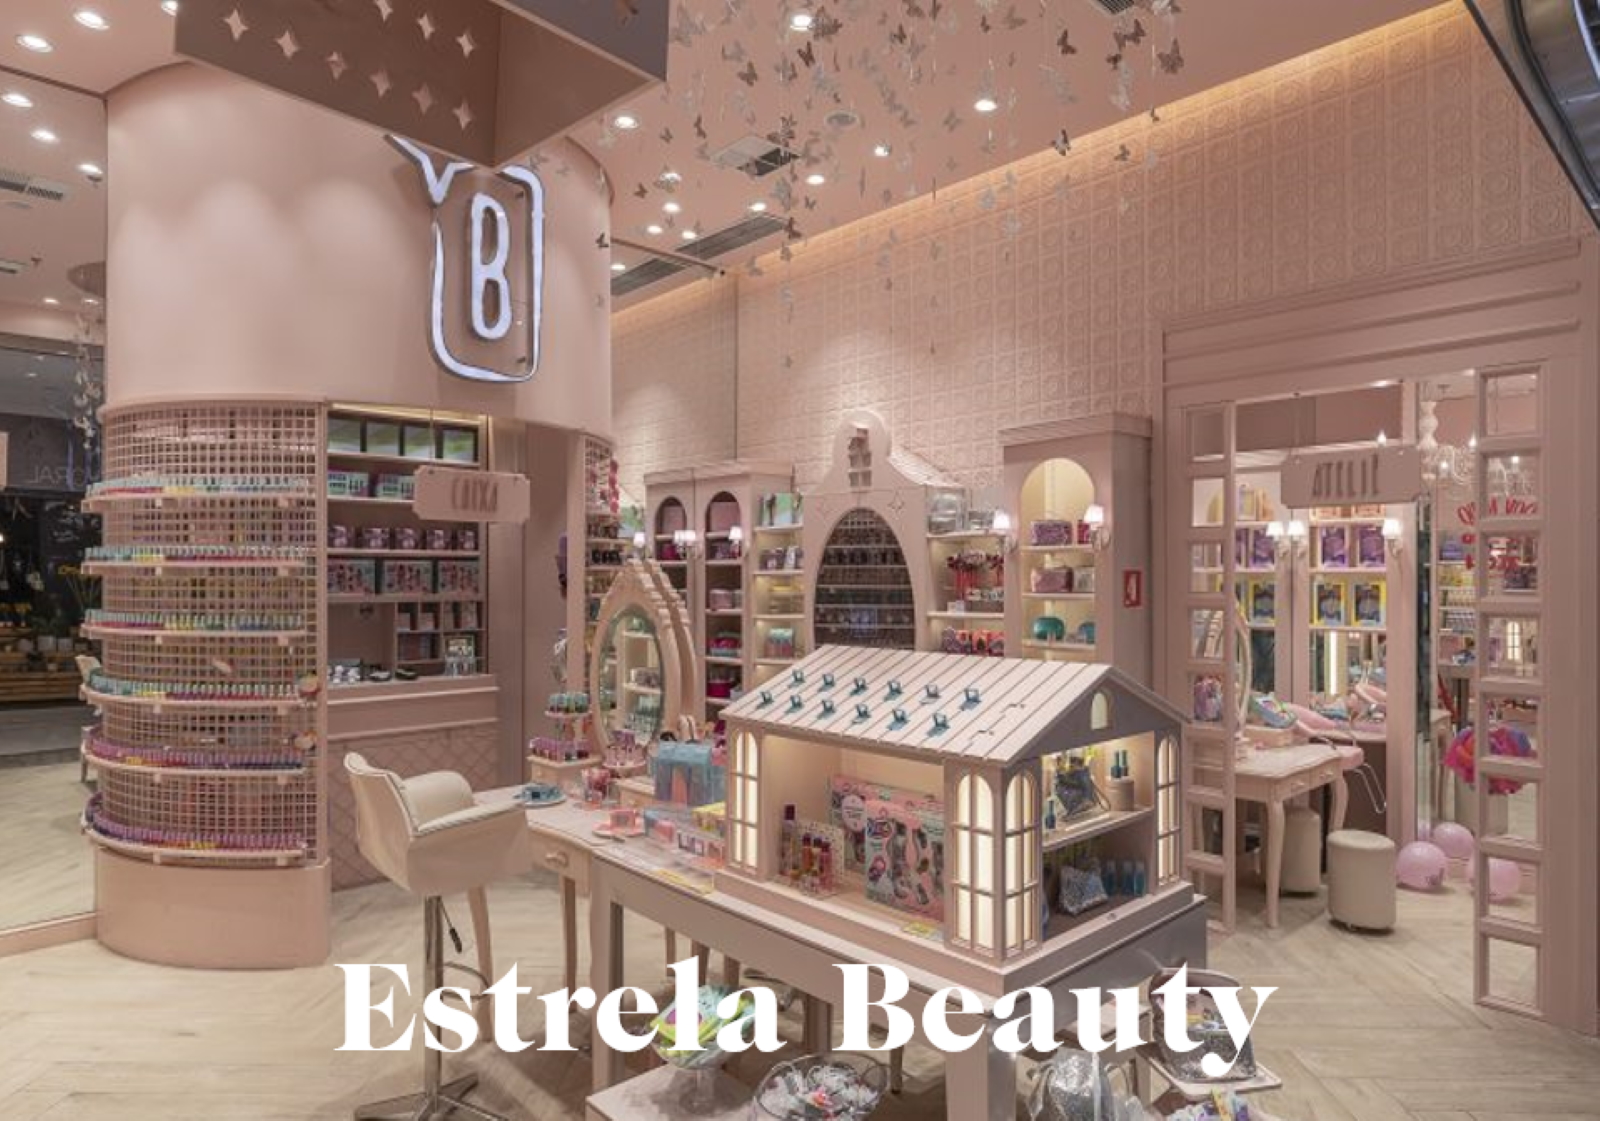 STRELA BEAUTY - RETAIL TOUR - MISSIONS MMM